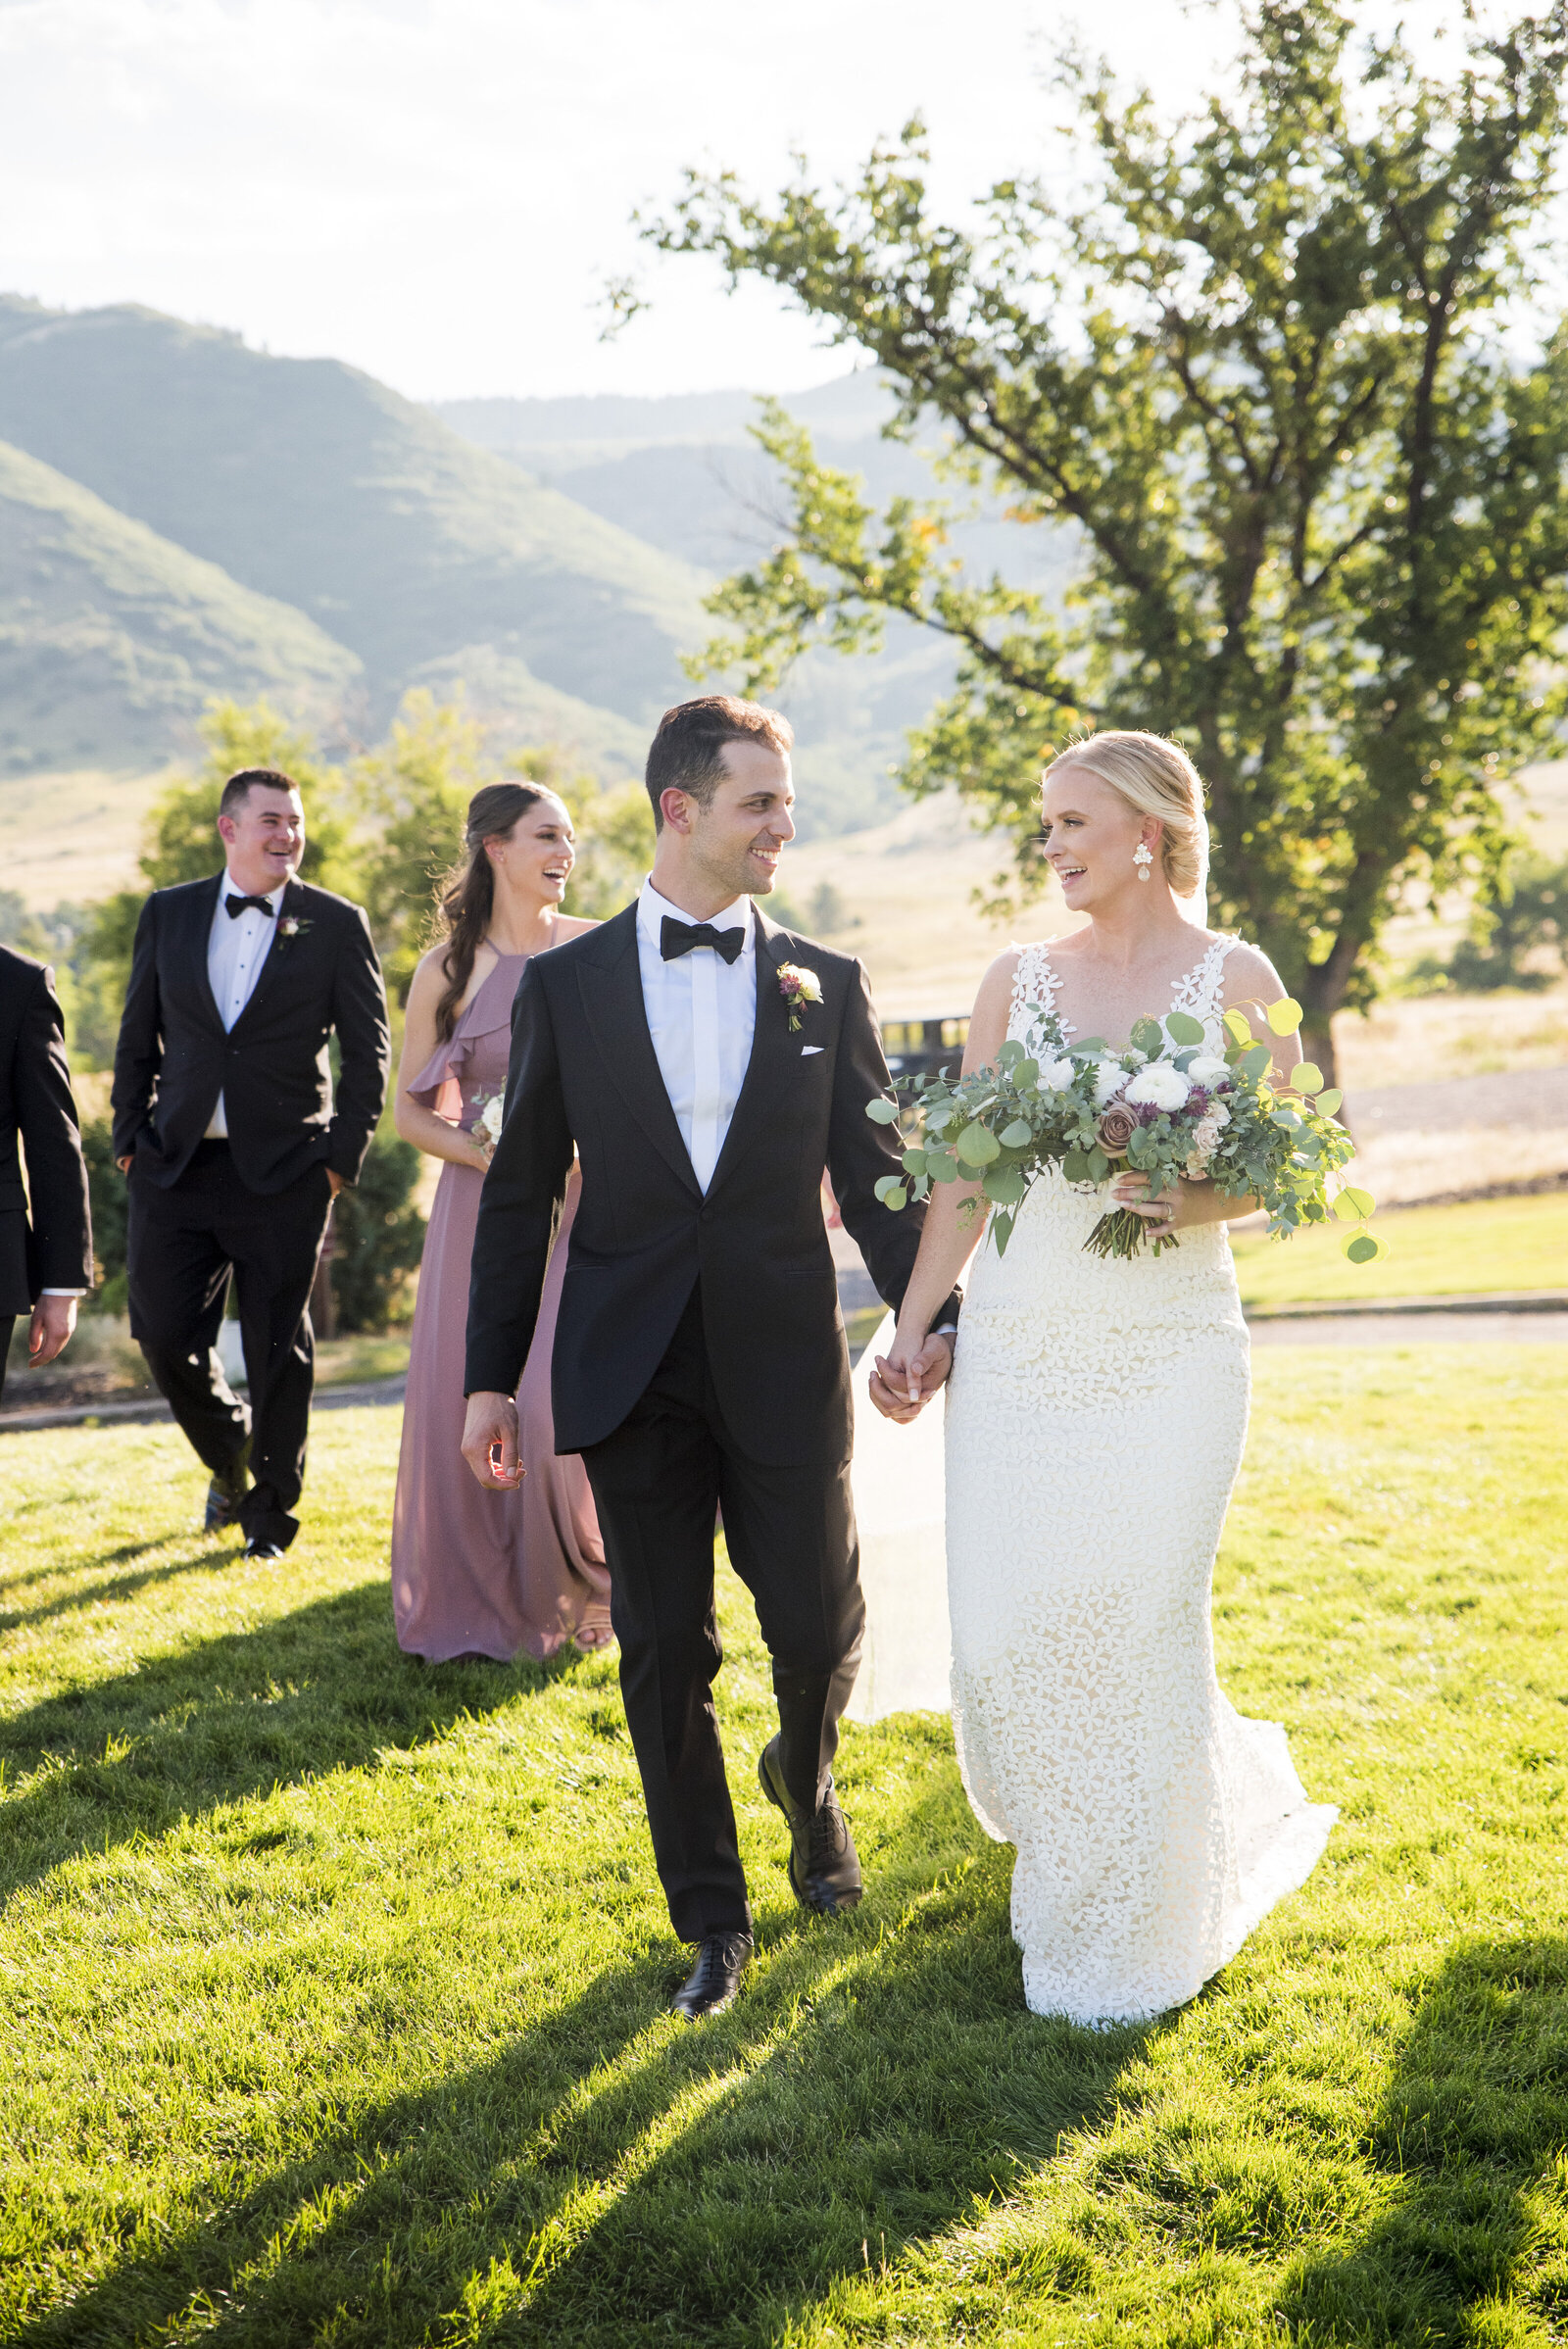 A bride and groom walk hand-in-hand toward the camera with their wedding party in the background, captured by Littleton wedding photographer Two One Photography.